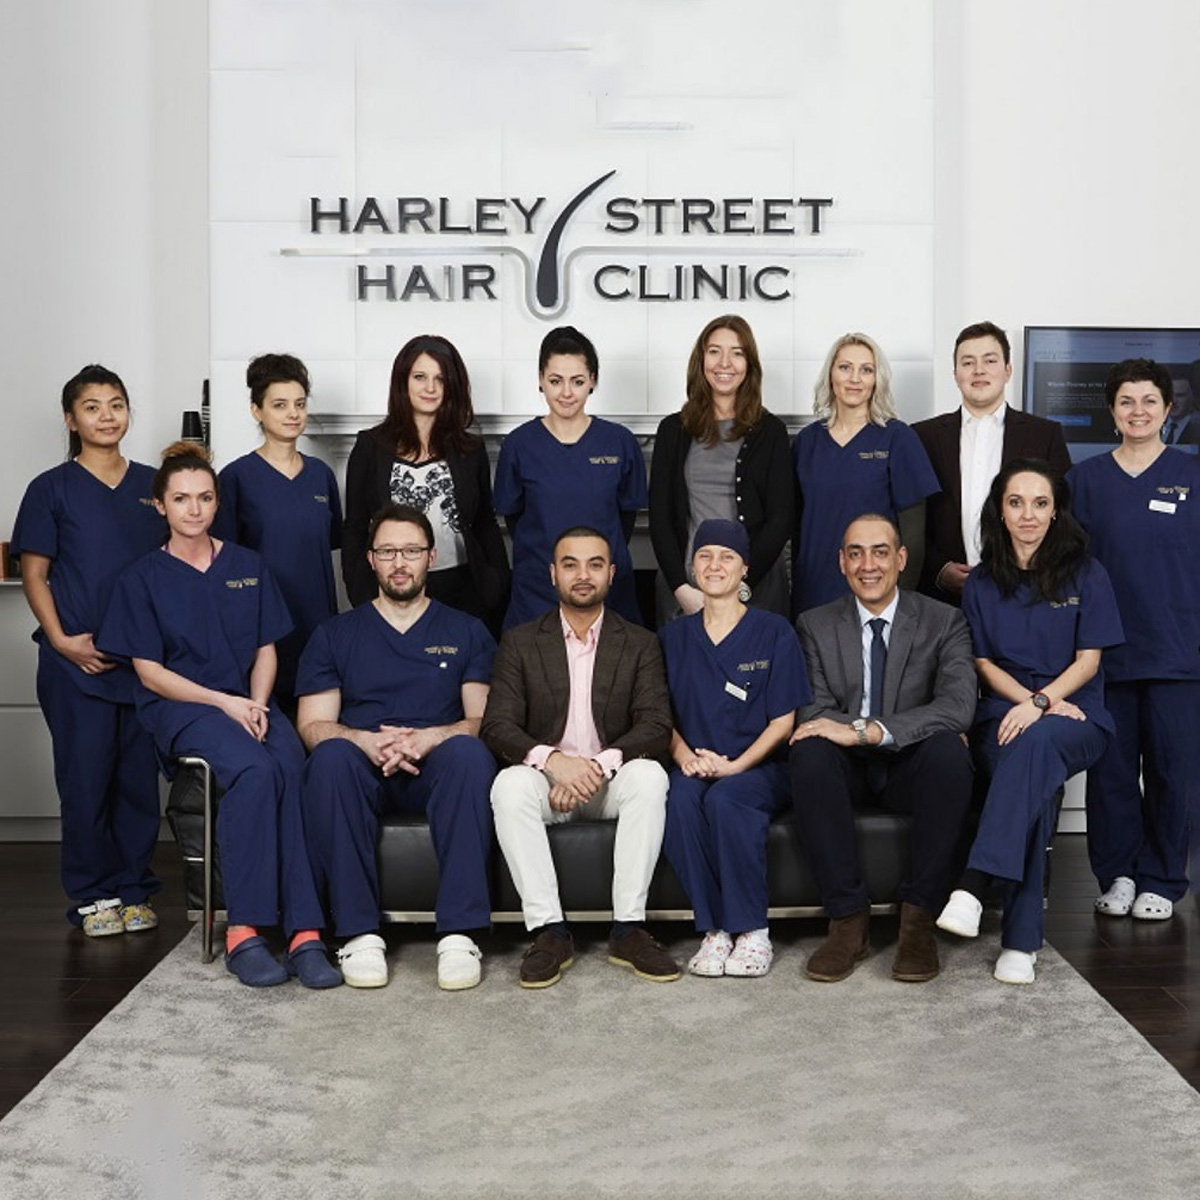 Win A FUE Hair Transplant With The Harley Street Hair Clinic